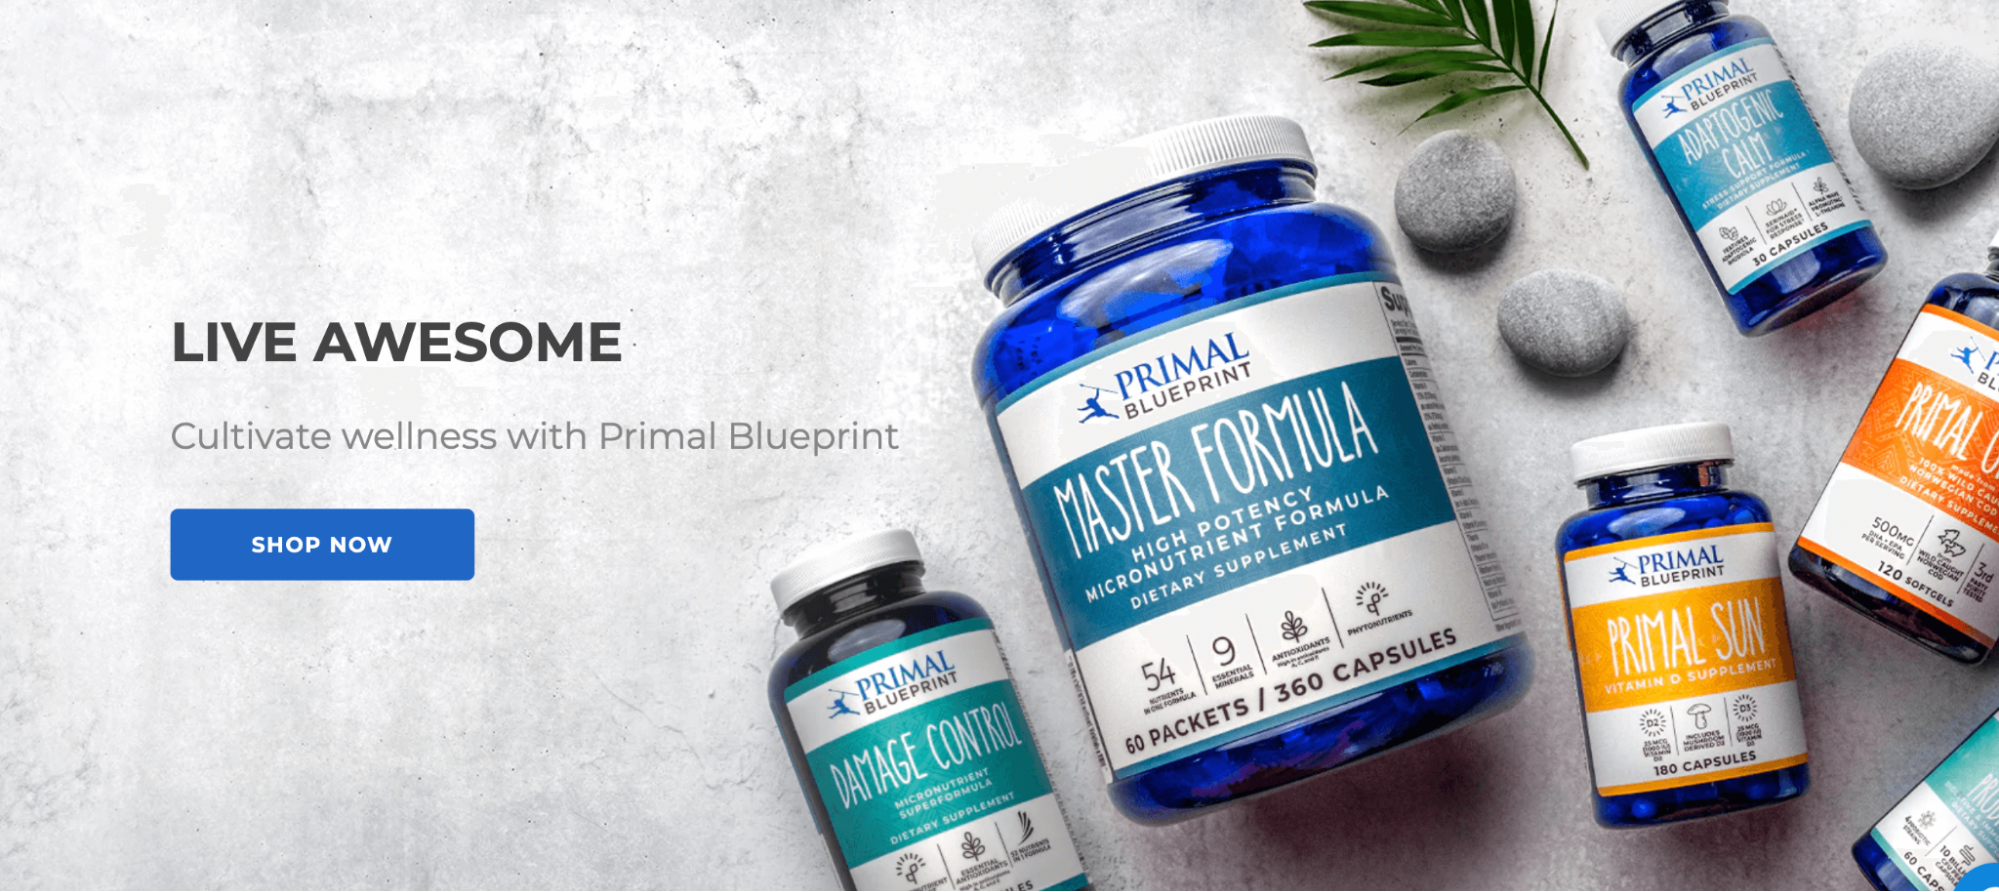 Primal Blueprint offers a variety of supplements. 